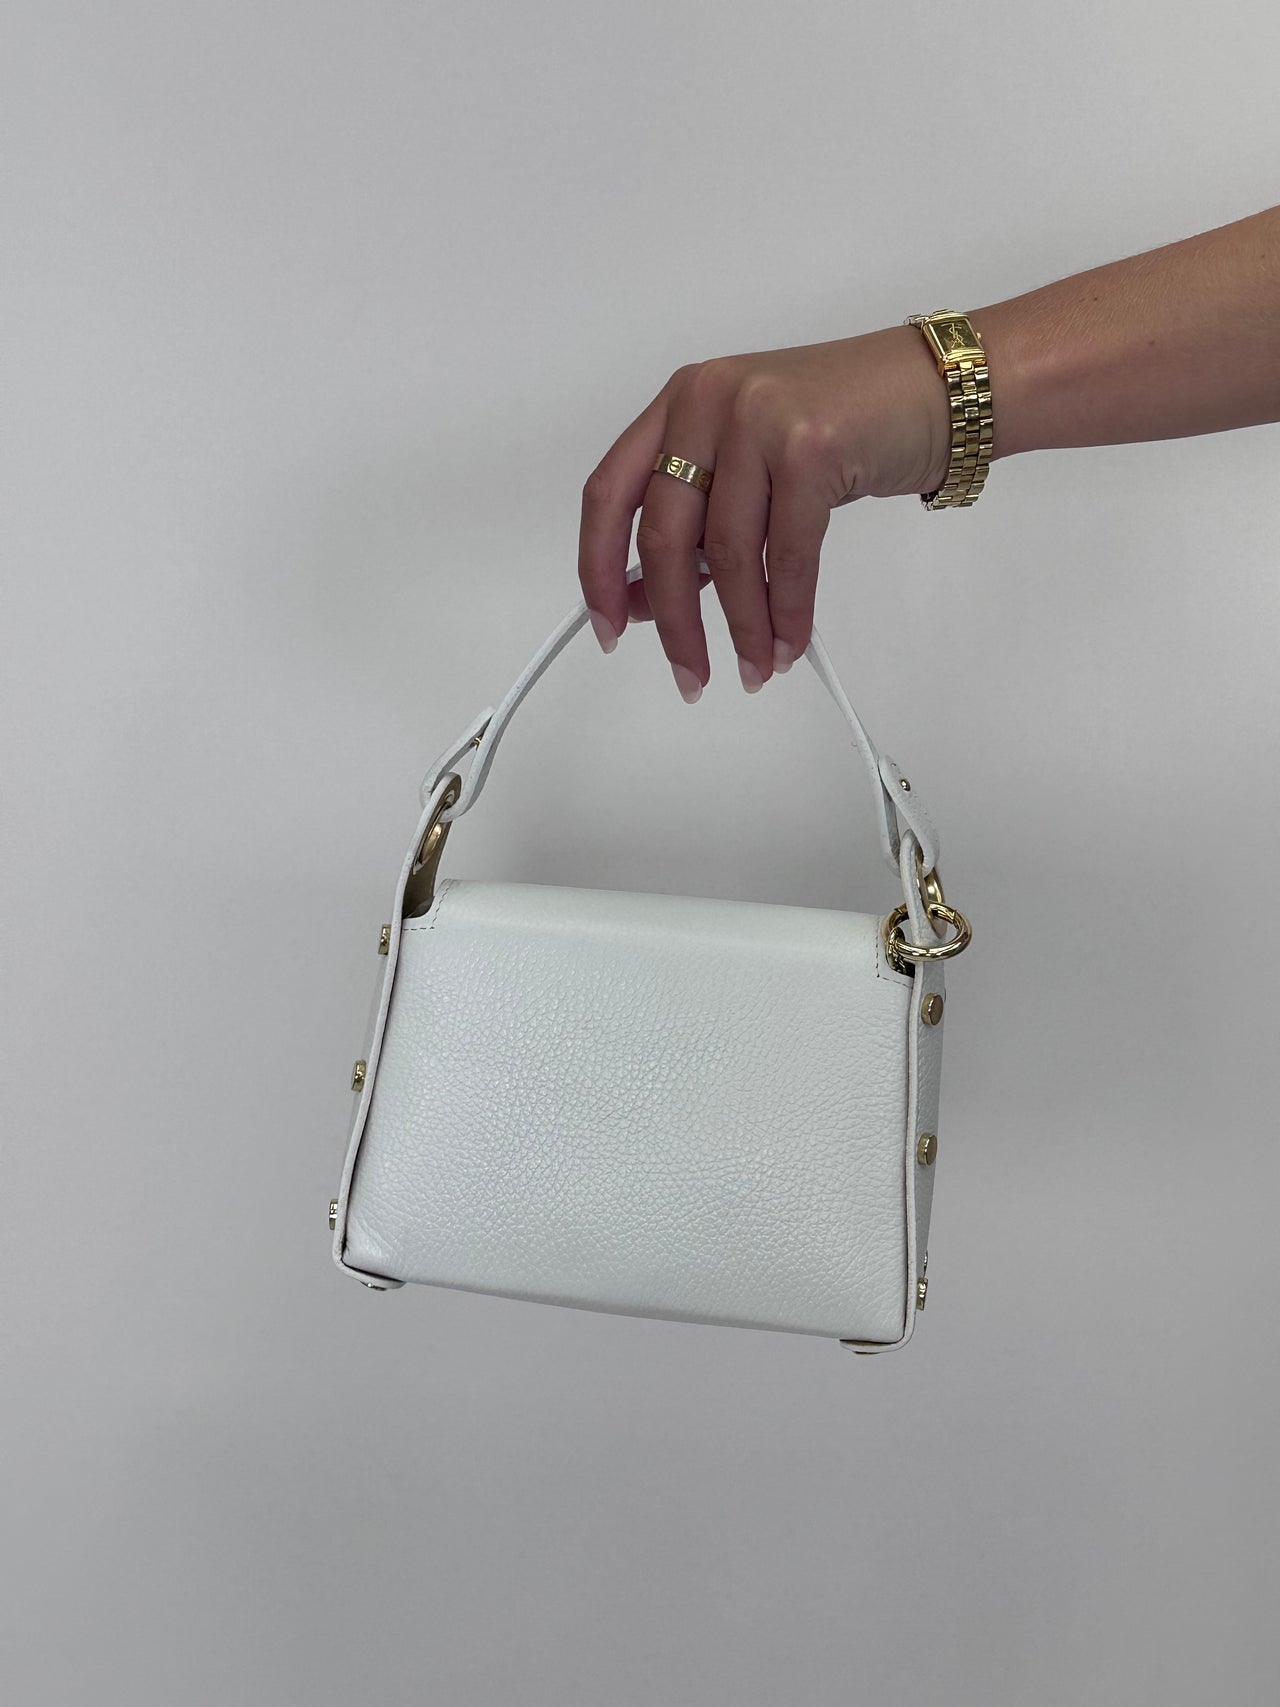 Far From Average Handbag White, Evening Bag by German Fuentes | LIT Boutique